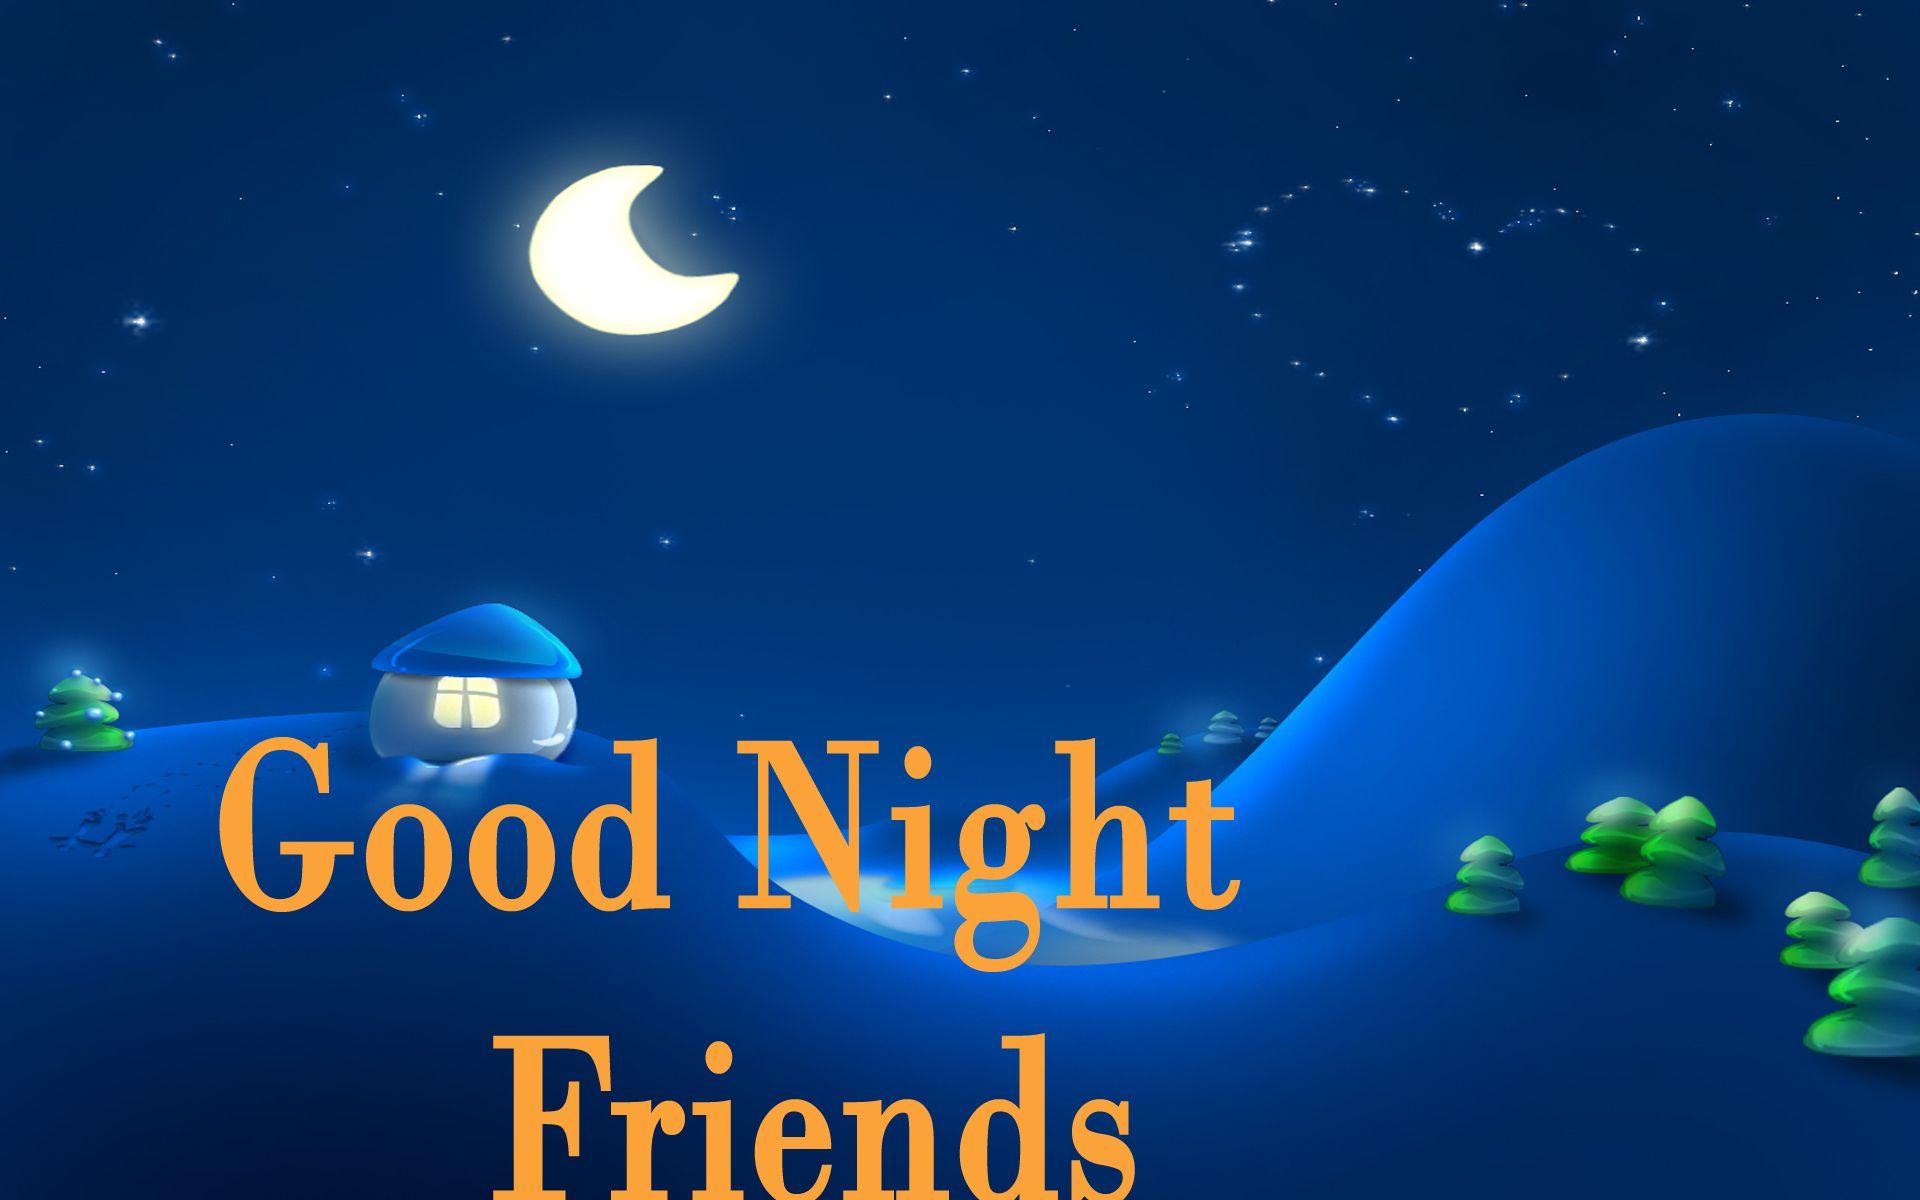 Peaceful Night Images Wallpapers